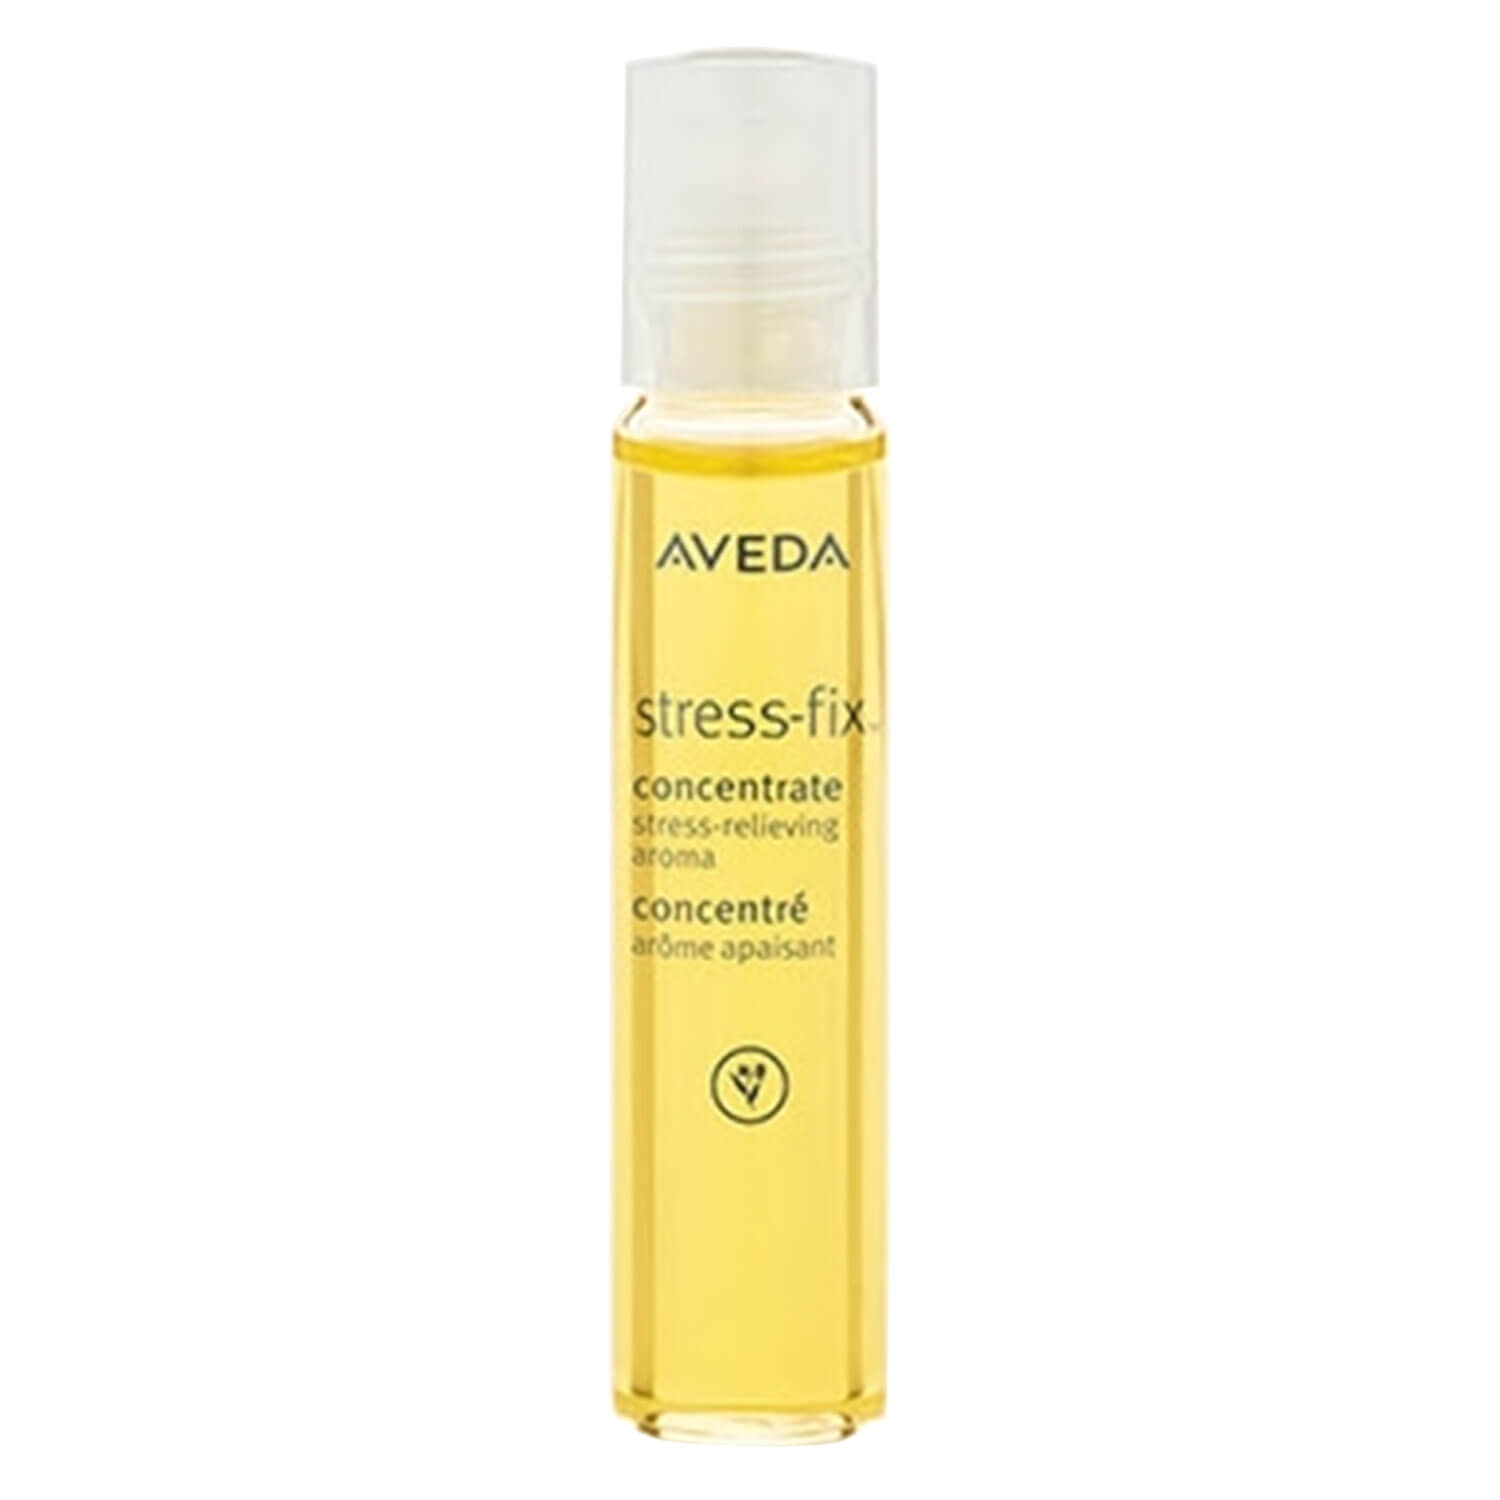 Product image from stress-fix - concentrate rollerball